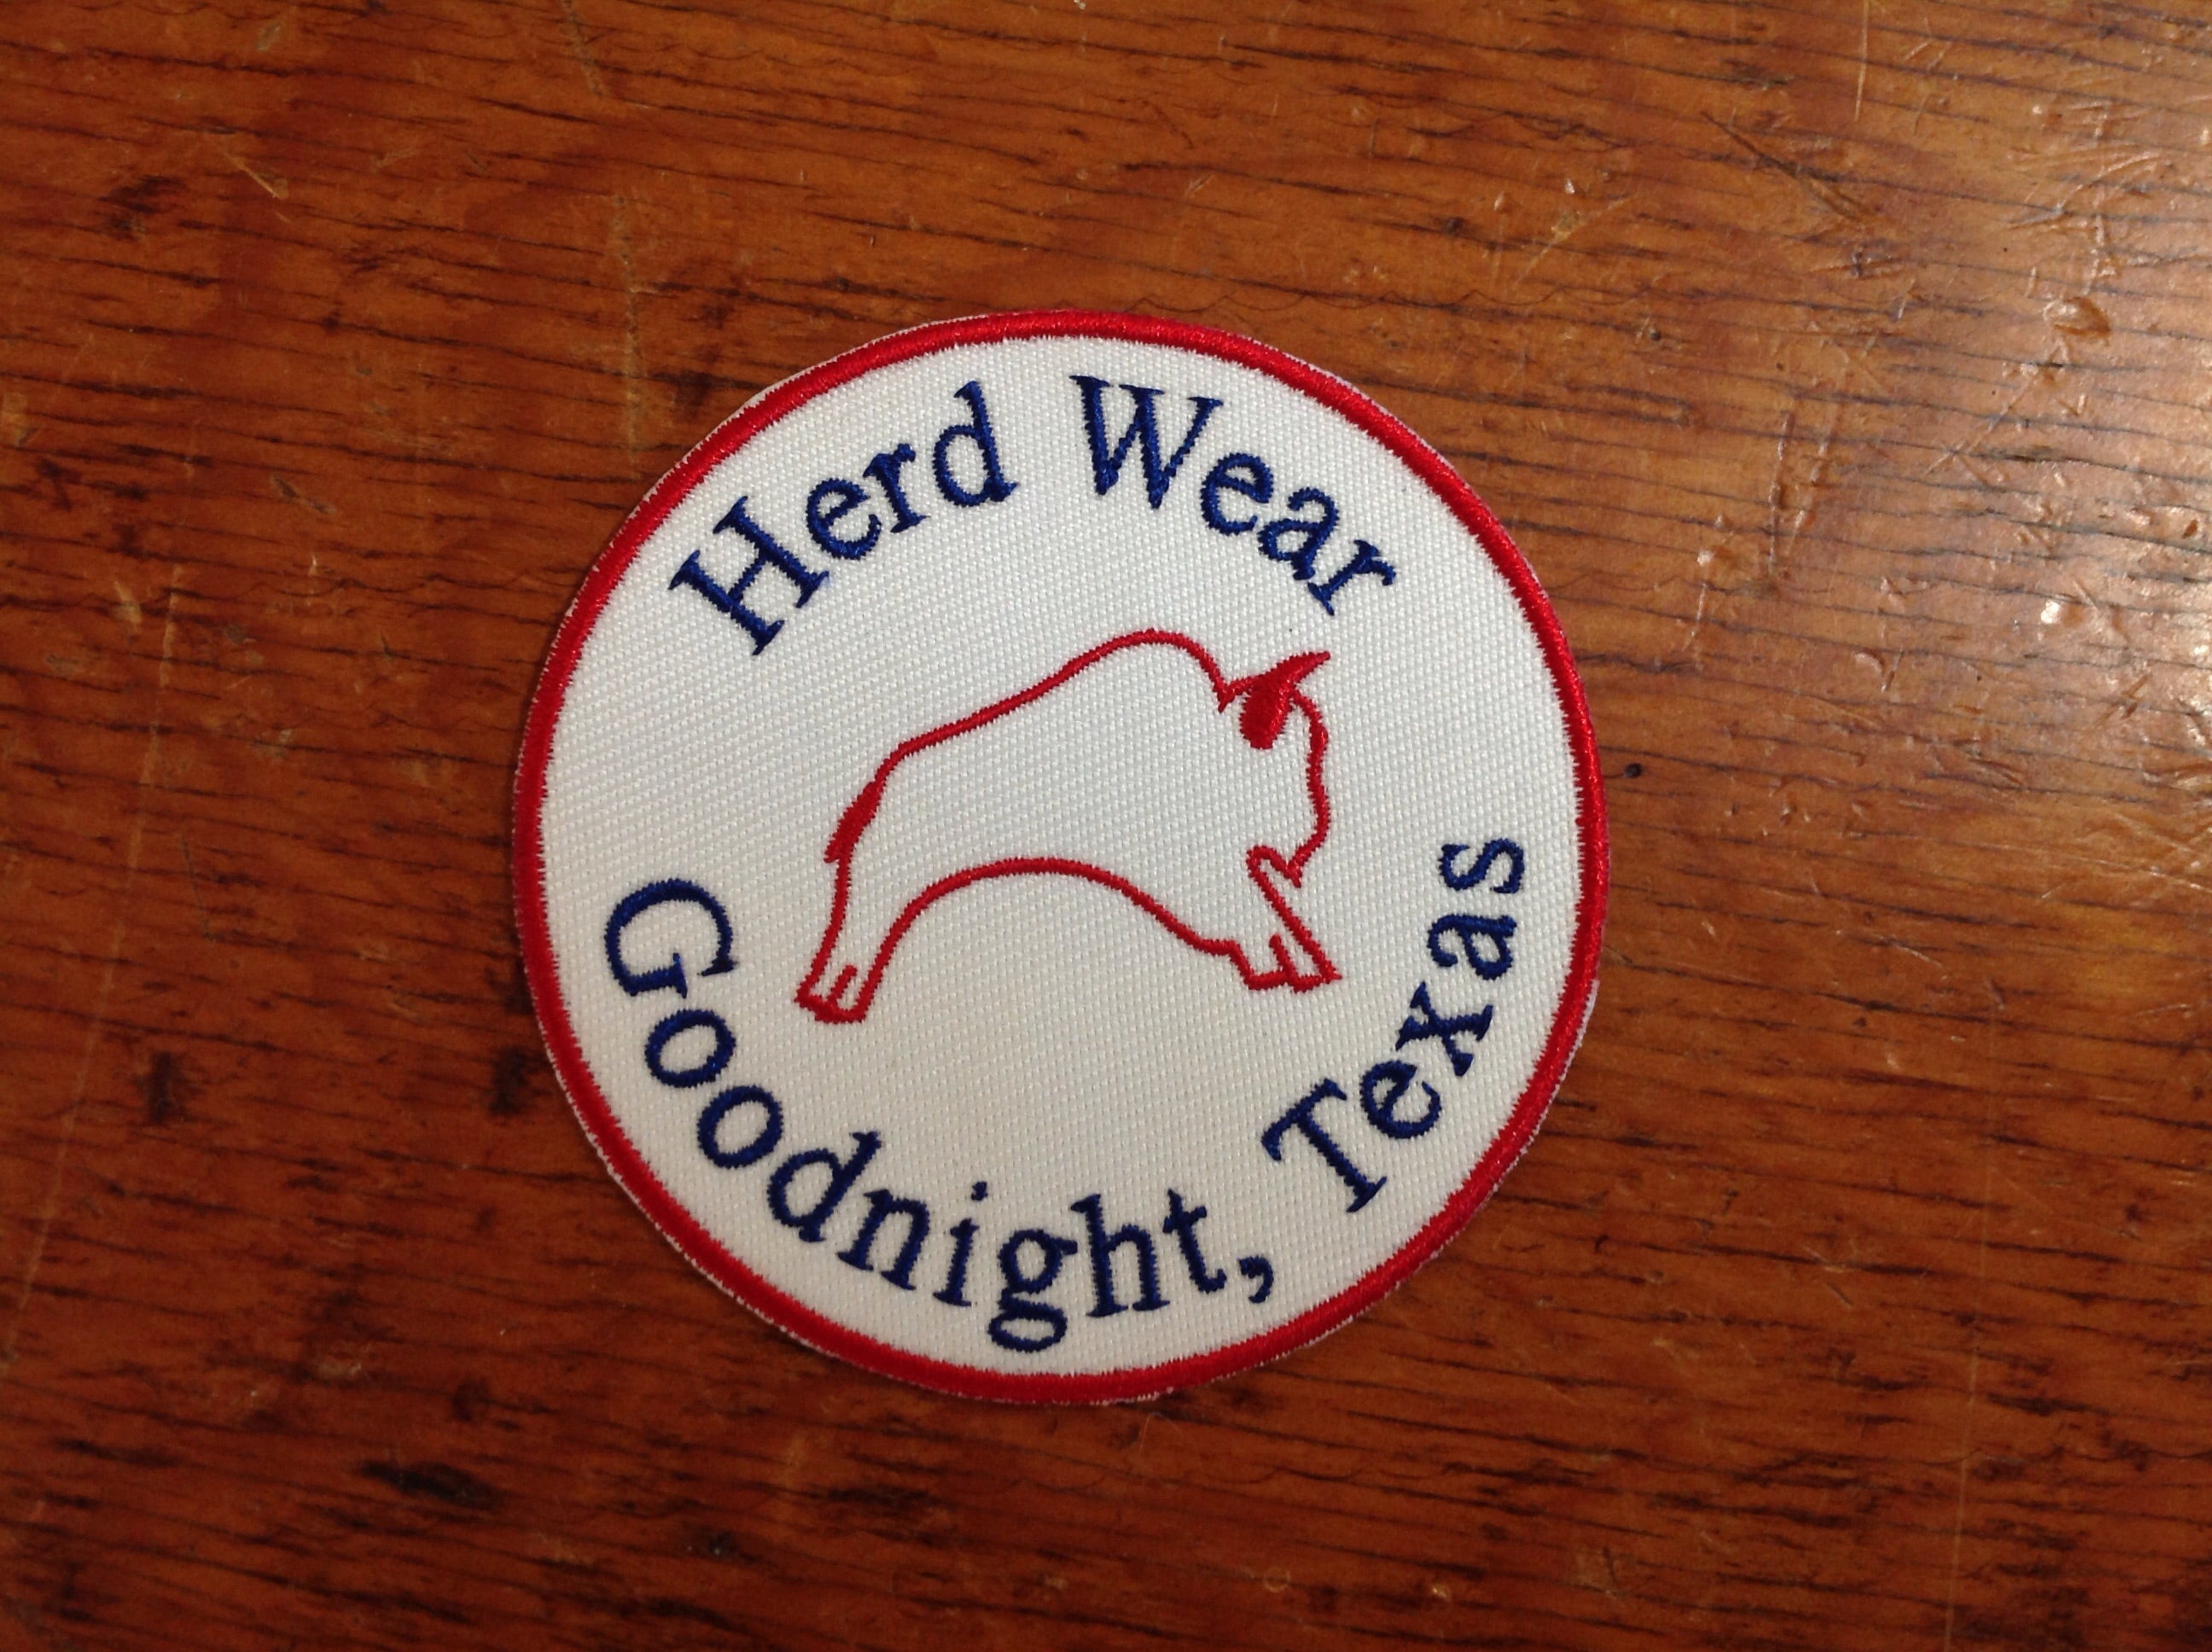 The Herd Wear - Goodnight embroidered patch collection